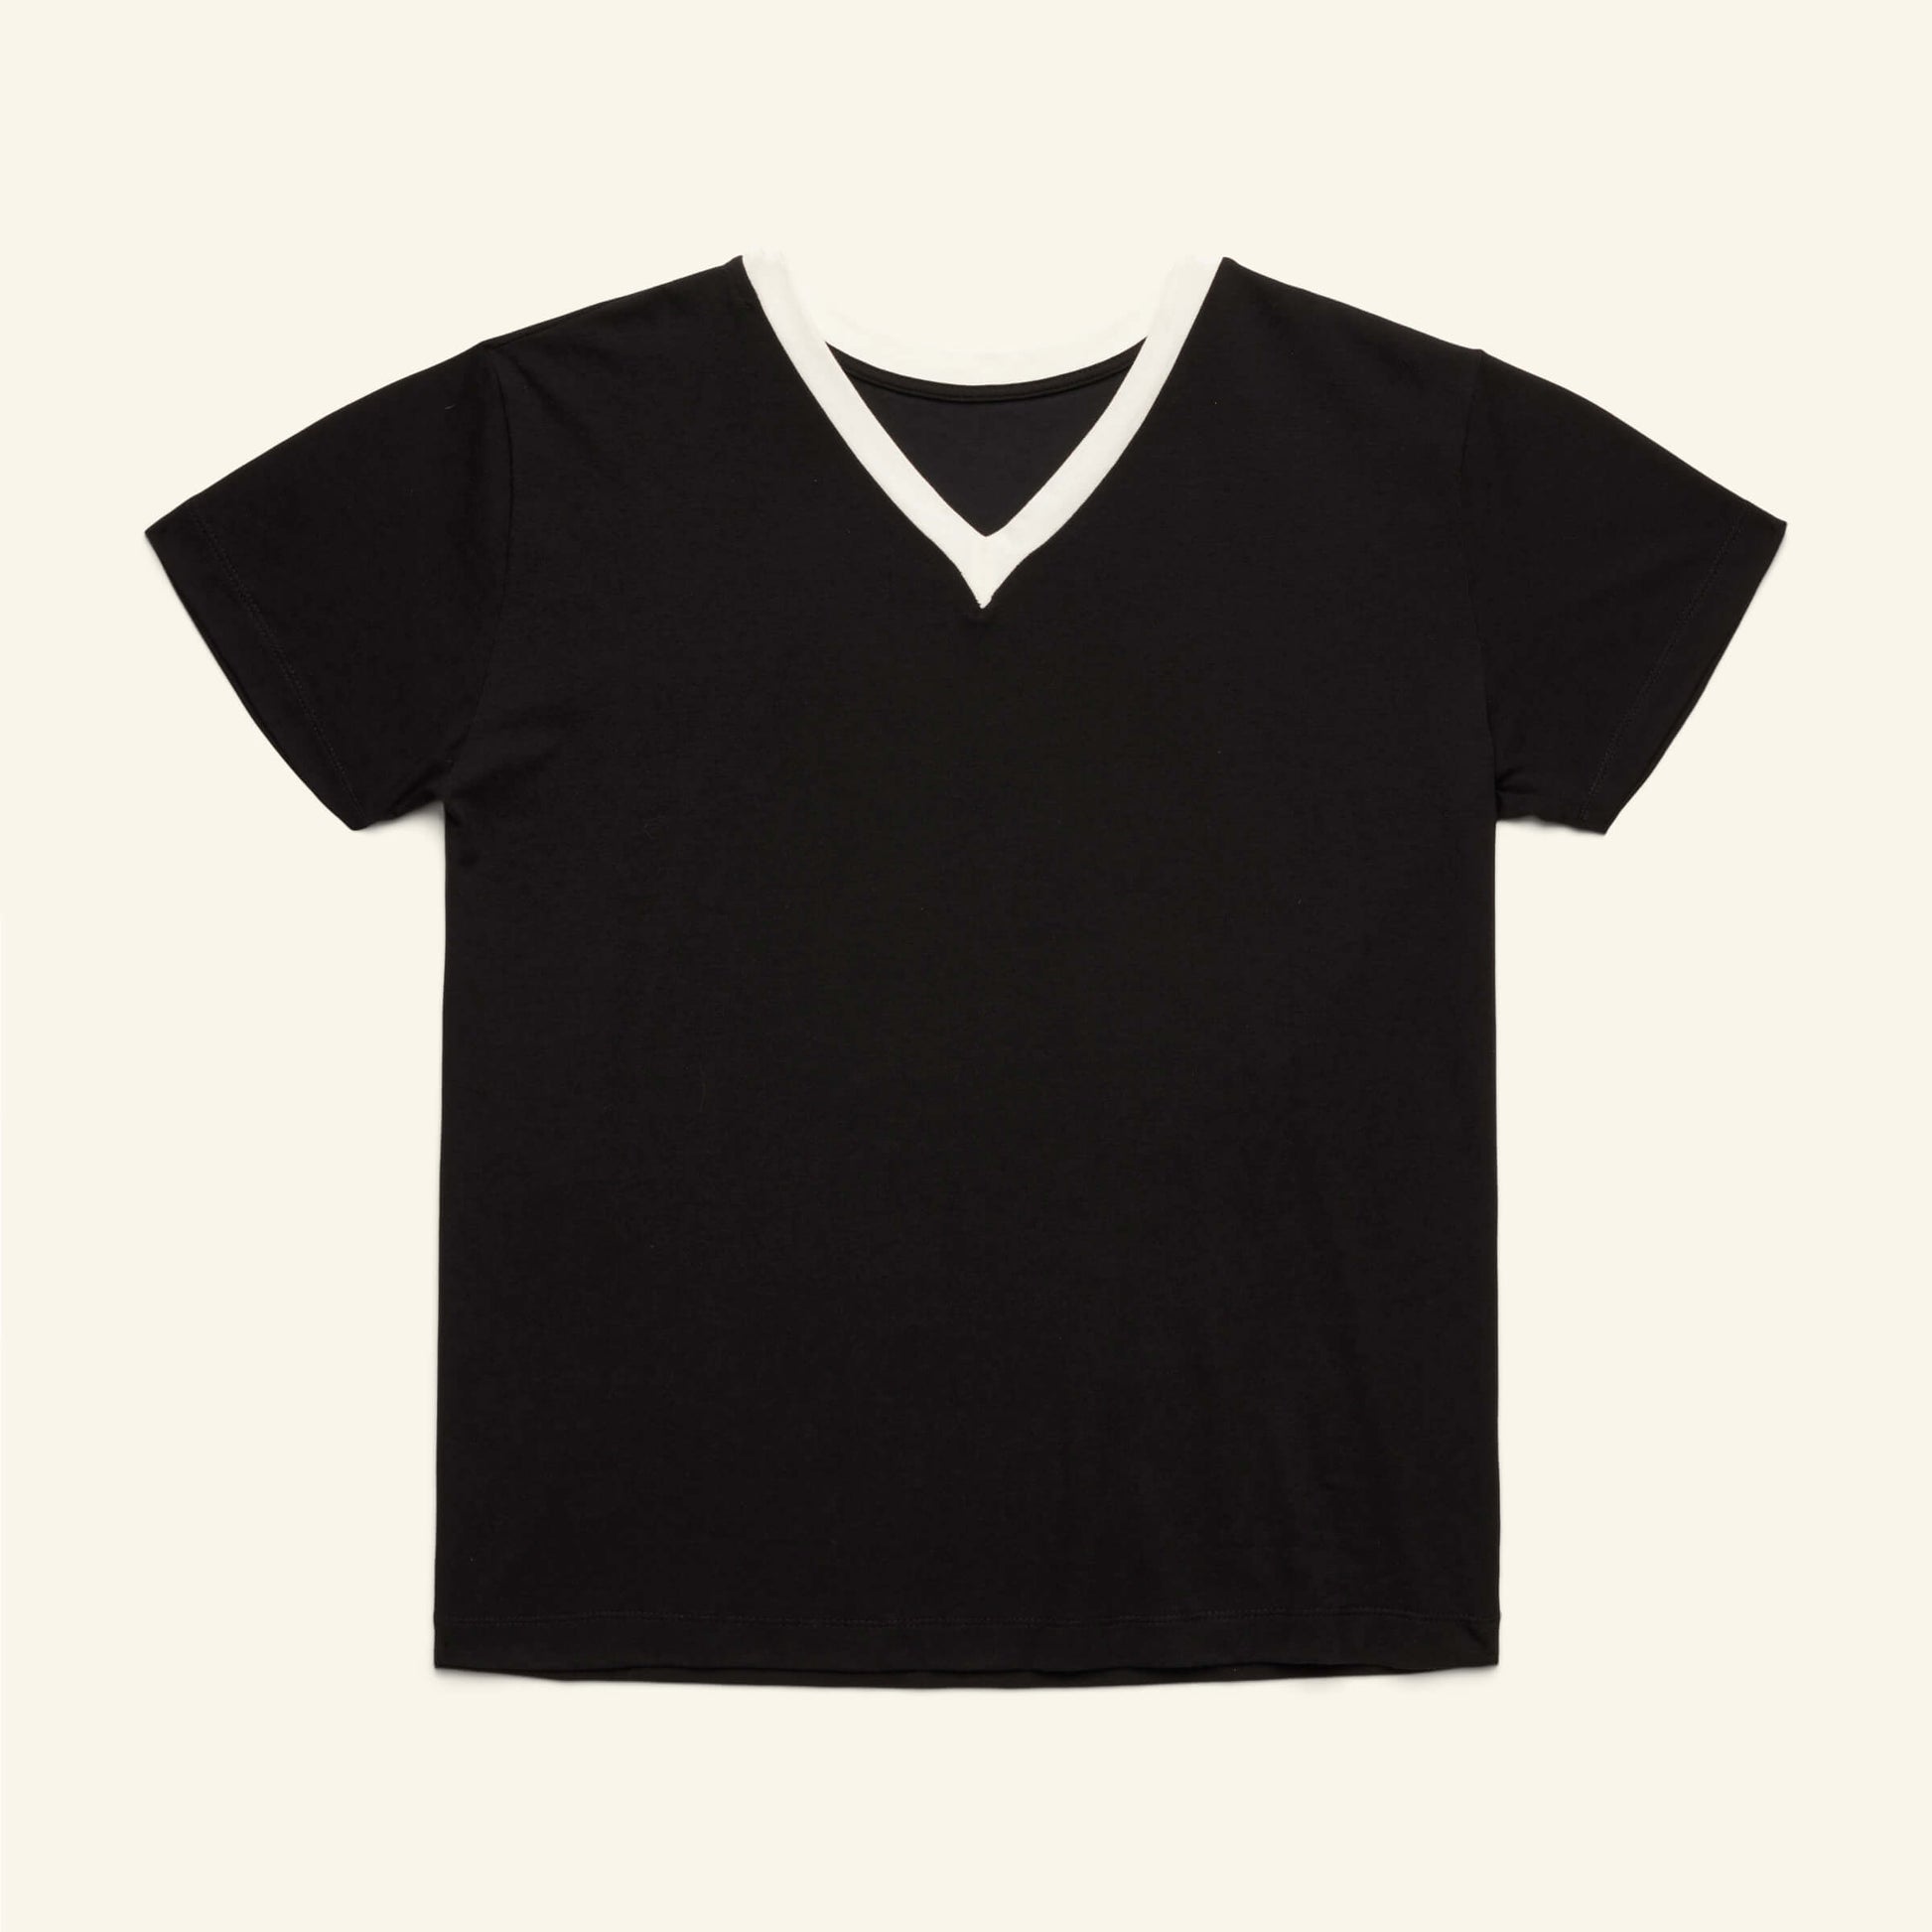 The Slumber Cloud Essential V-Neck made with Outlast temperature regulation technology